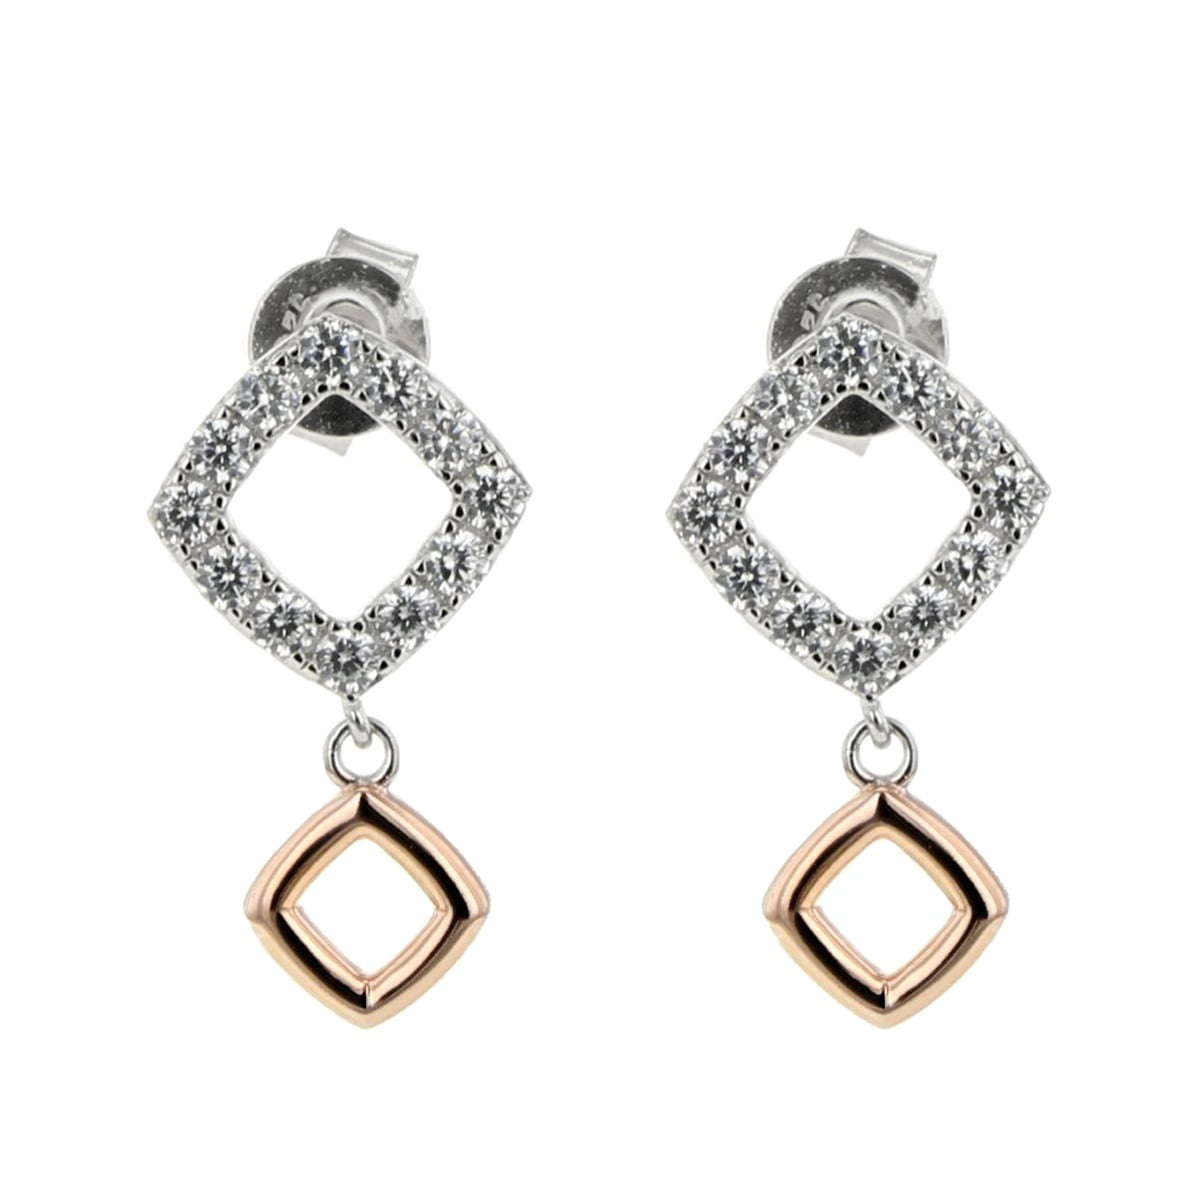 19mm Interlocking Link Drop Earrings with Cubic Zirconia and Rose Gold ...